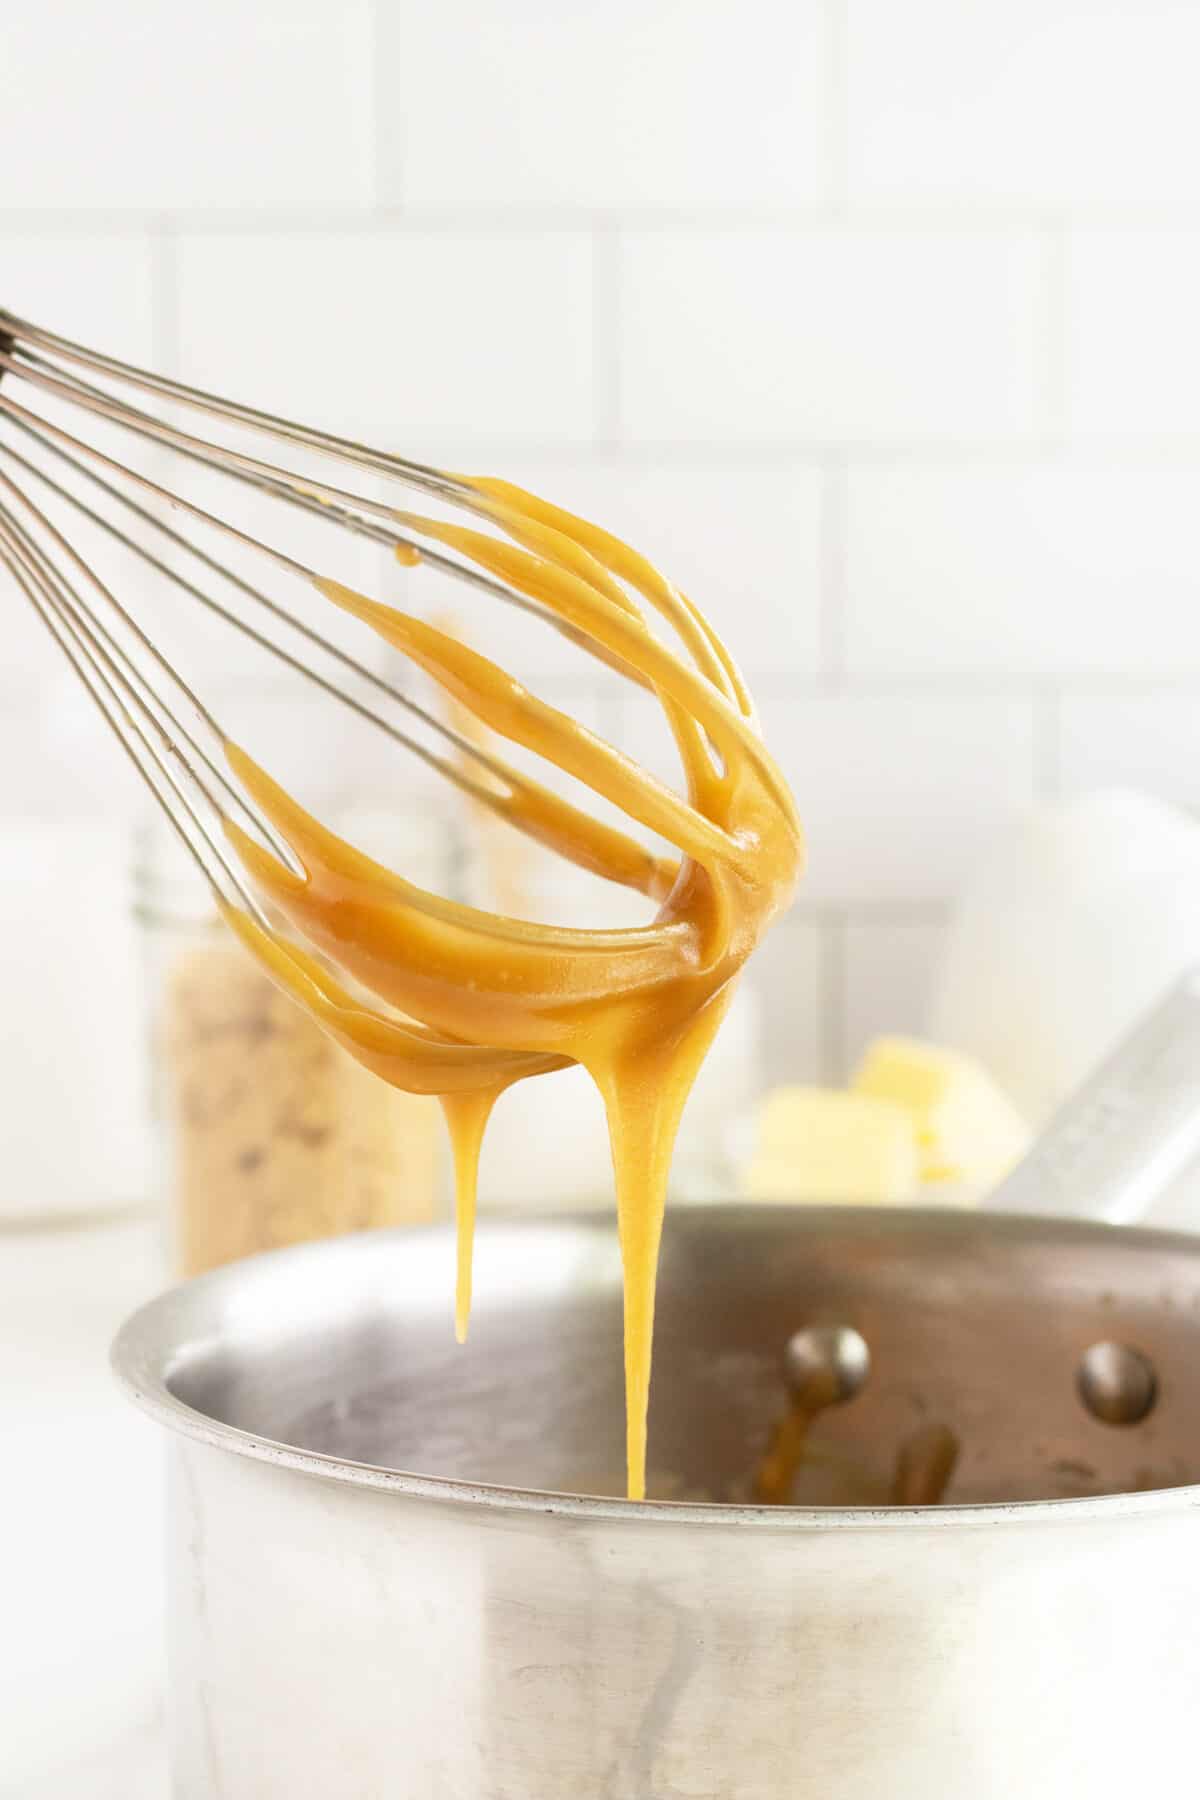 Salted Caramel Sauce dripping off a whisk